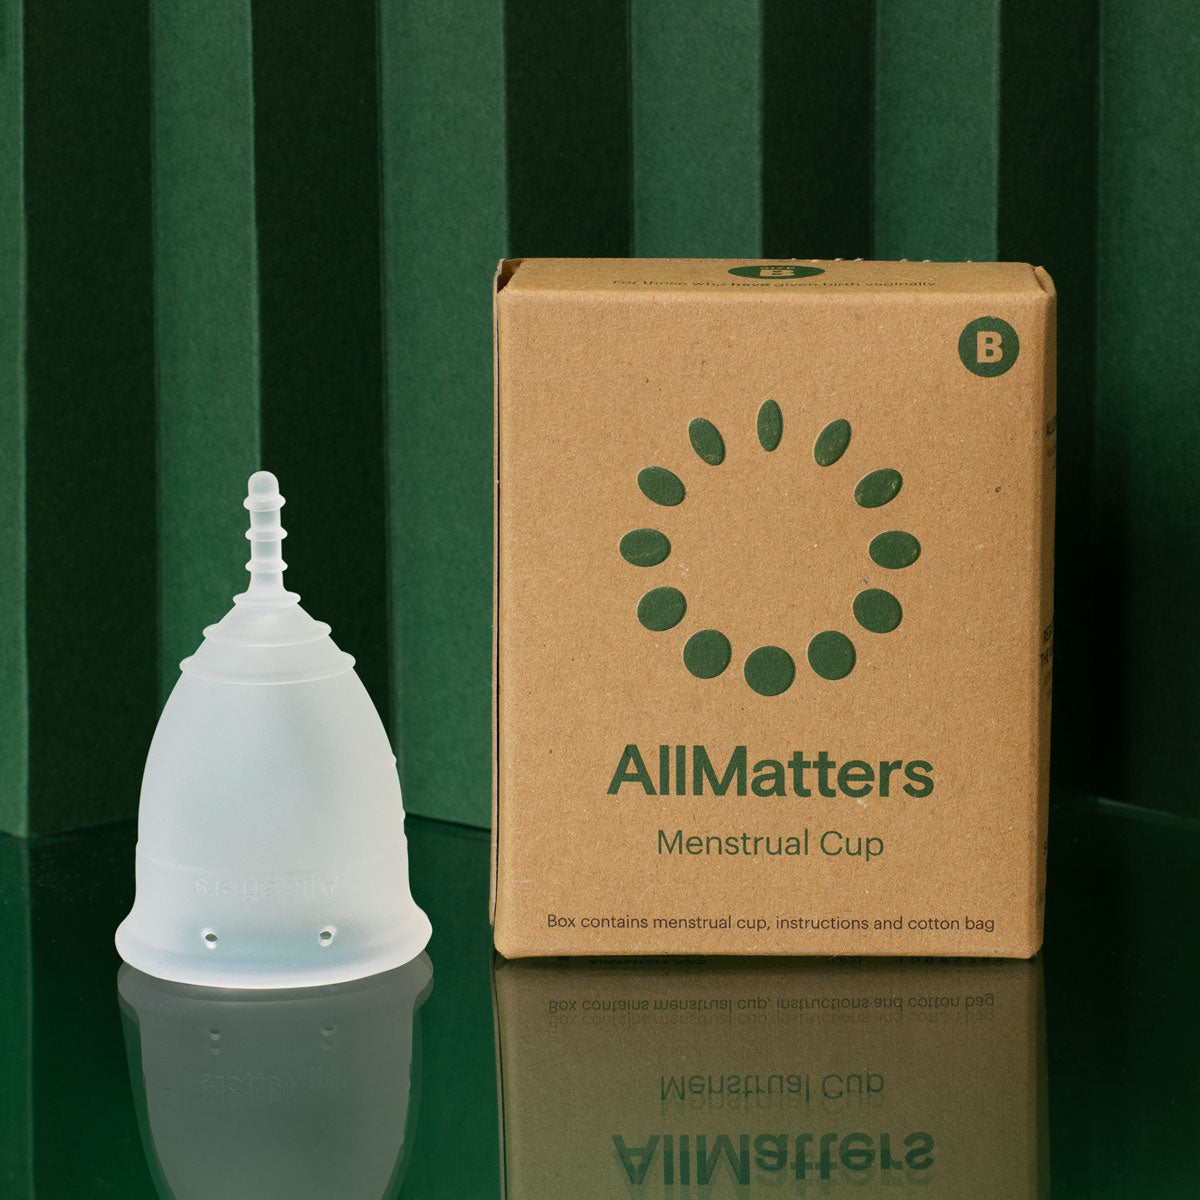 AllMatters size B menstrual cup with packaging